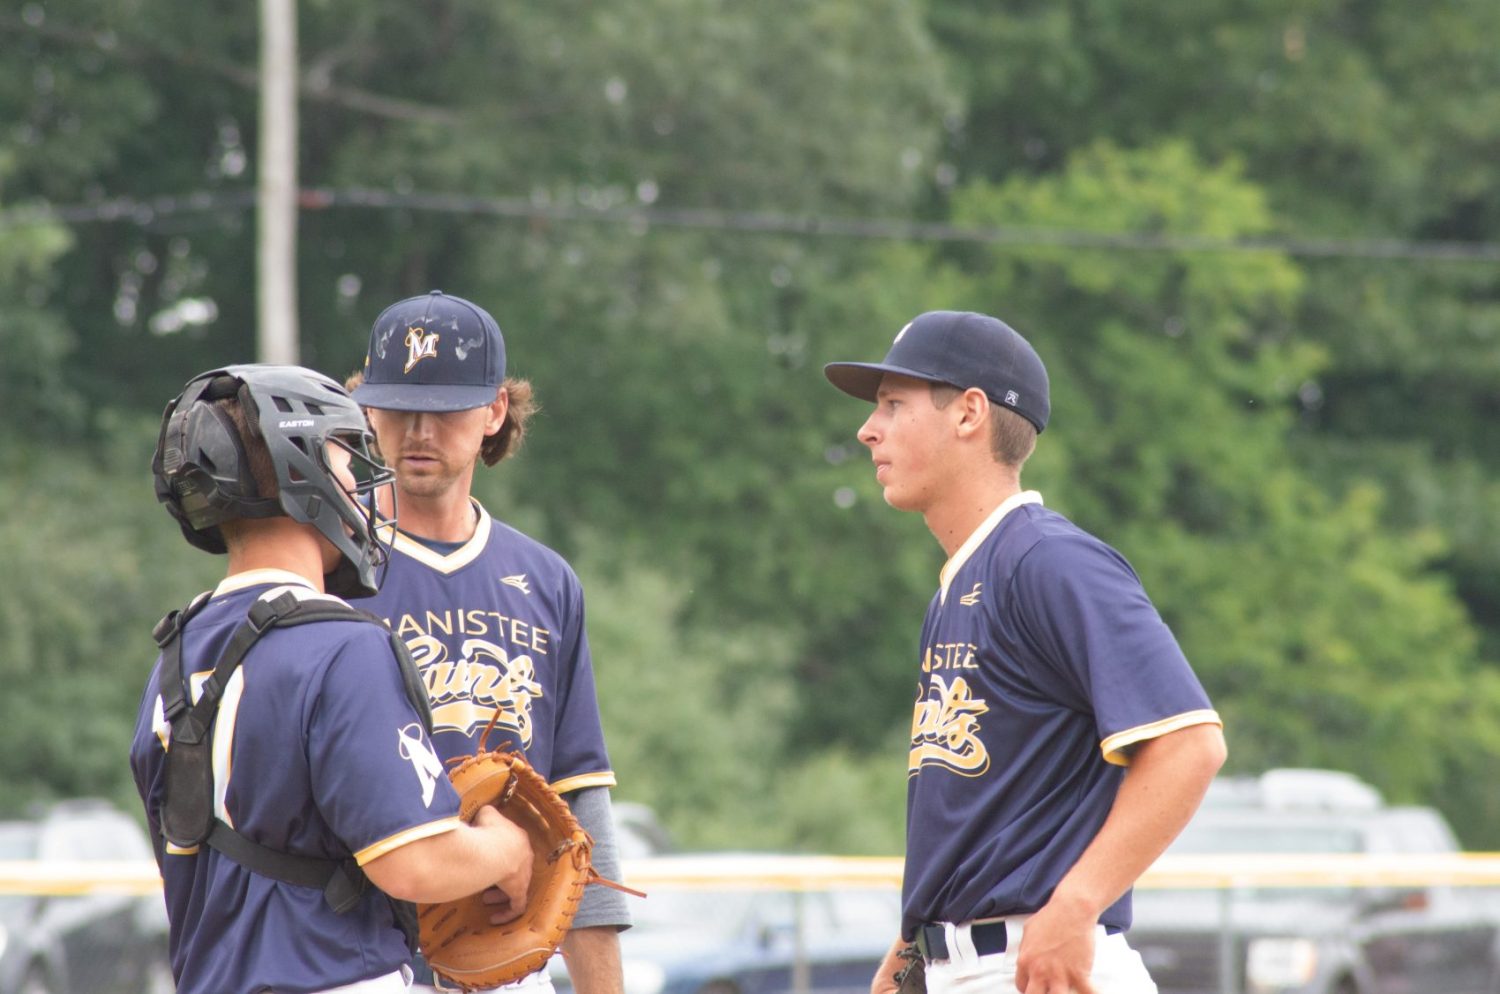 Manistee Saints roll into summer baseball season with mix of veterans, newcomers